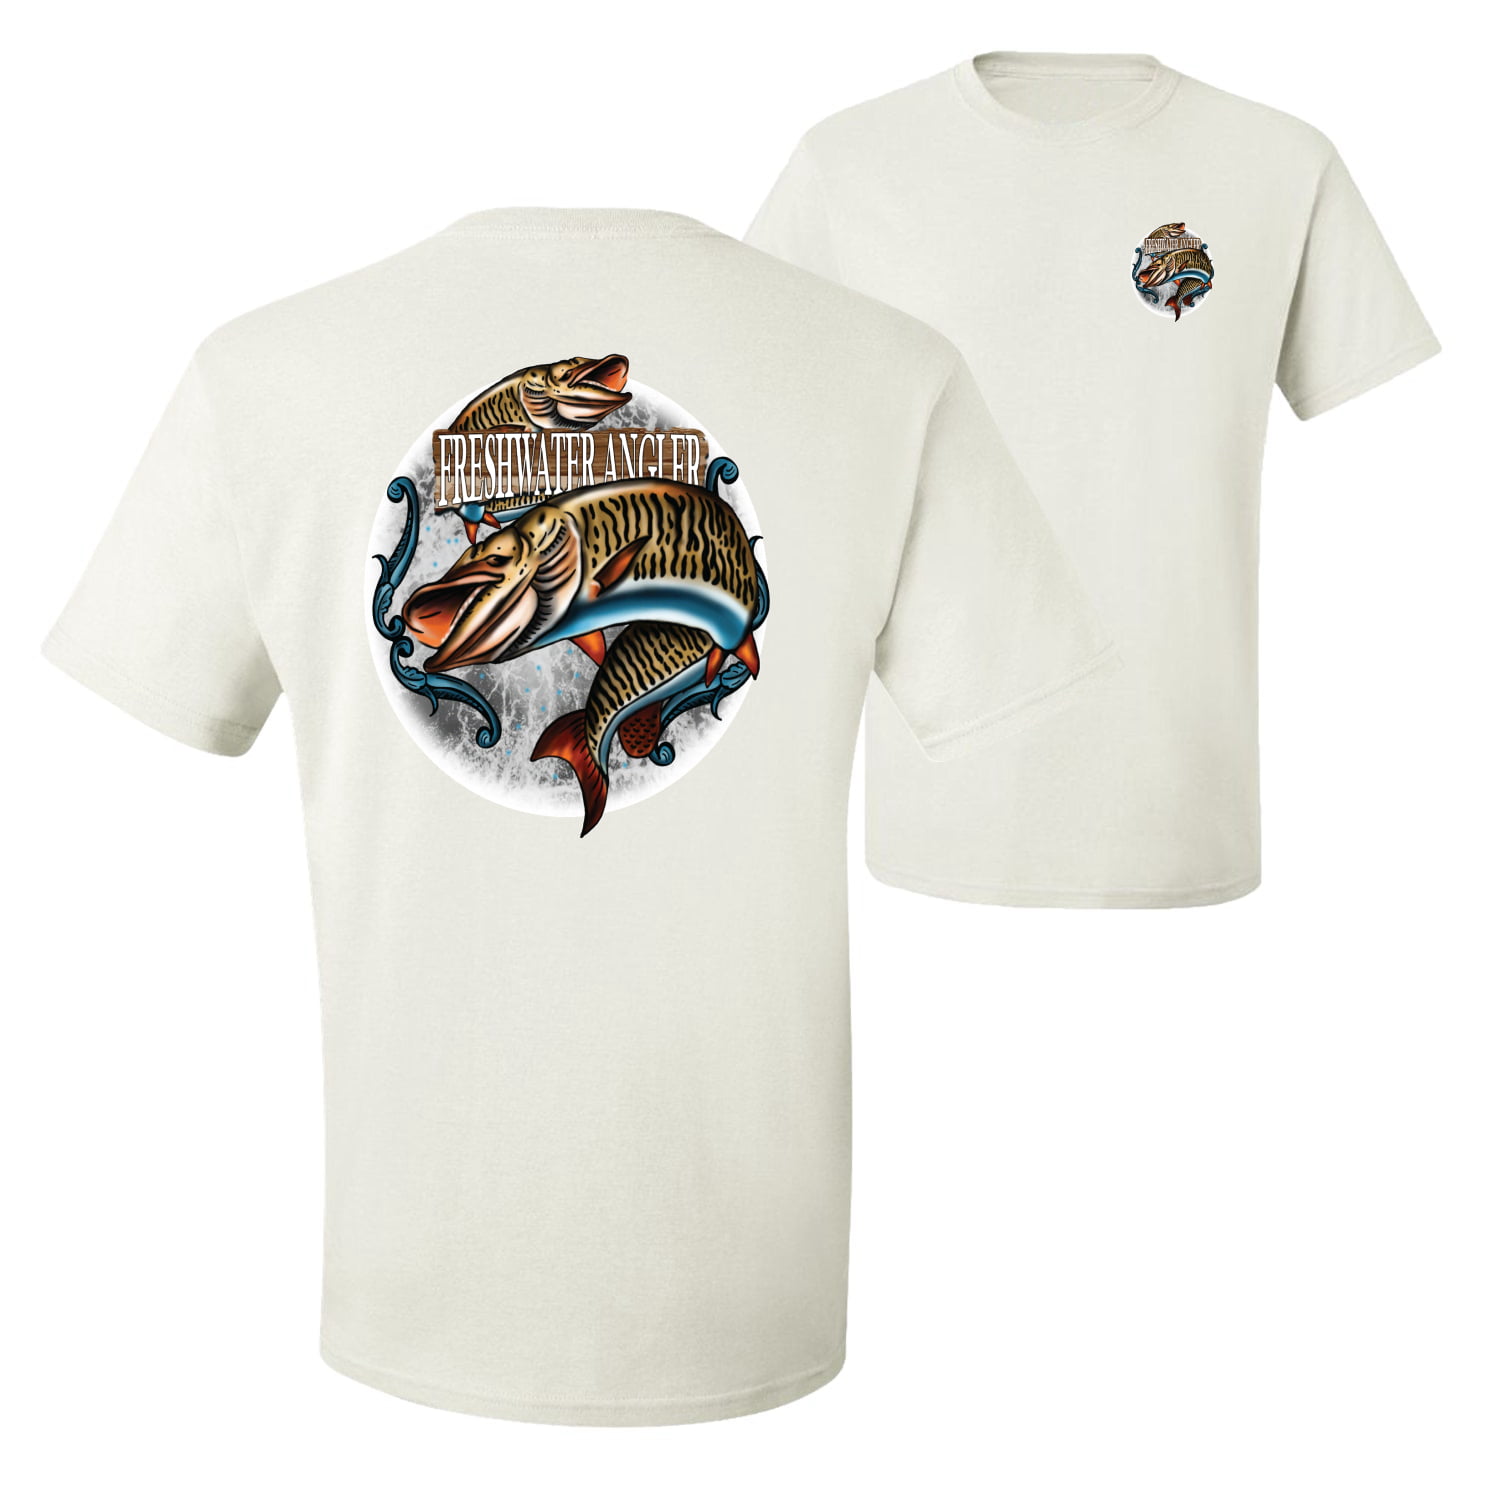 Wild Bobby,Freshwater Angler Fishing Front and Back Men's Graphic